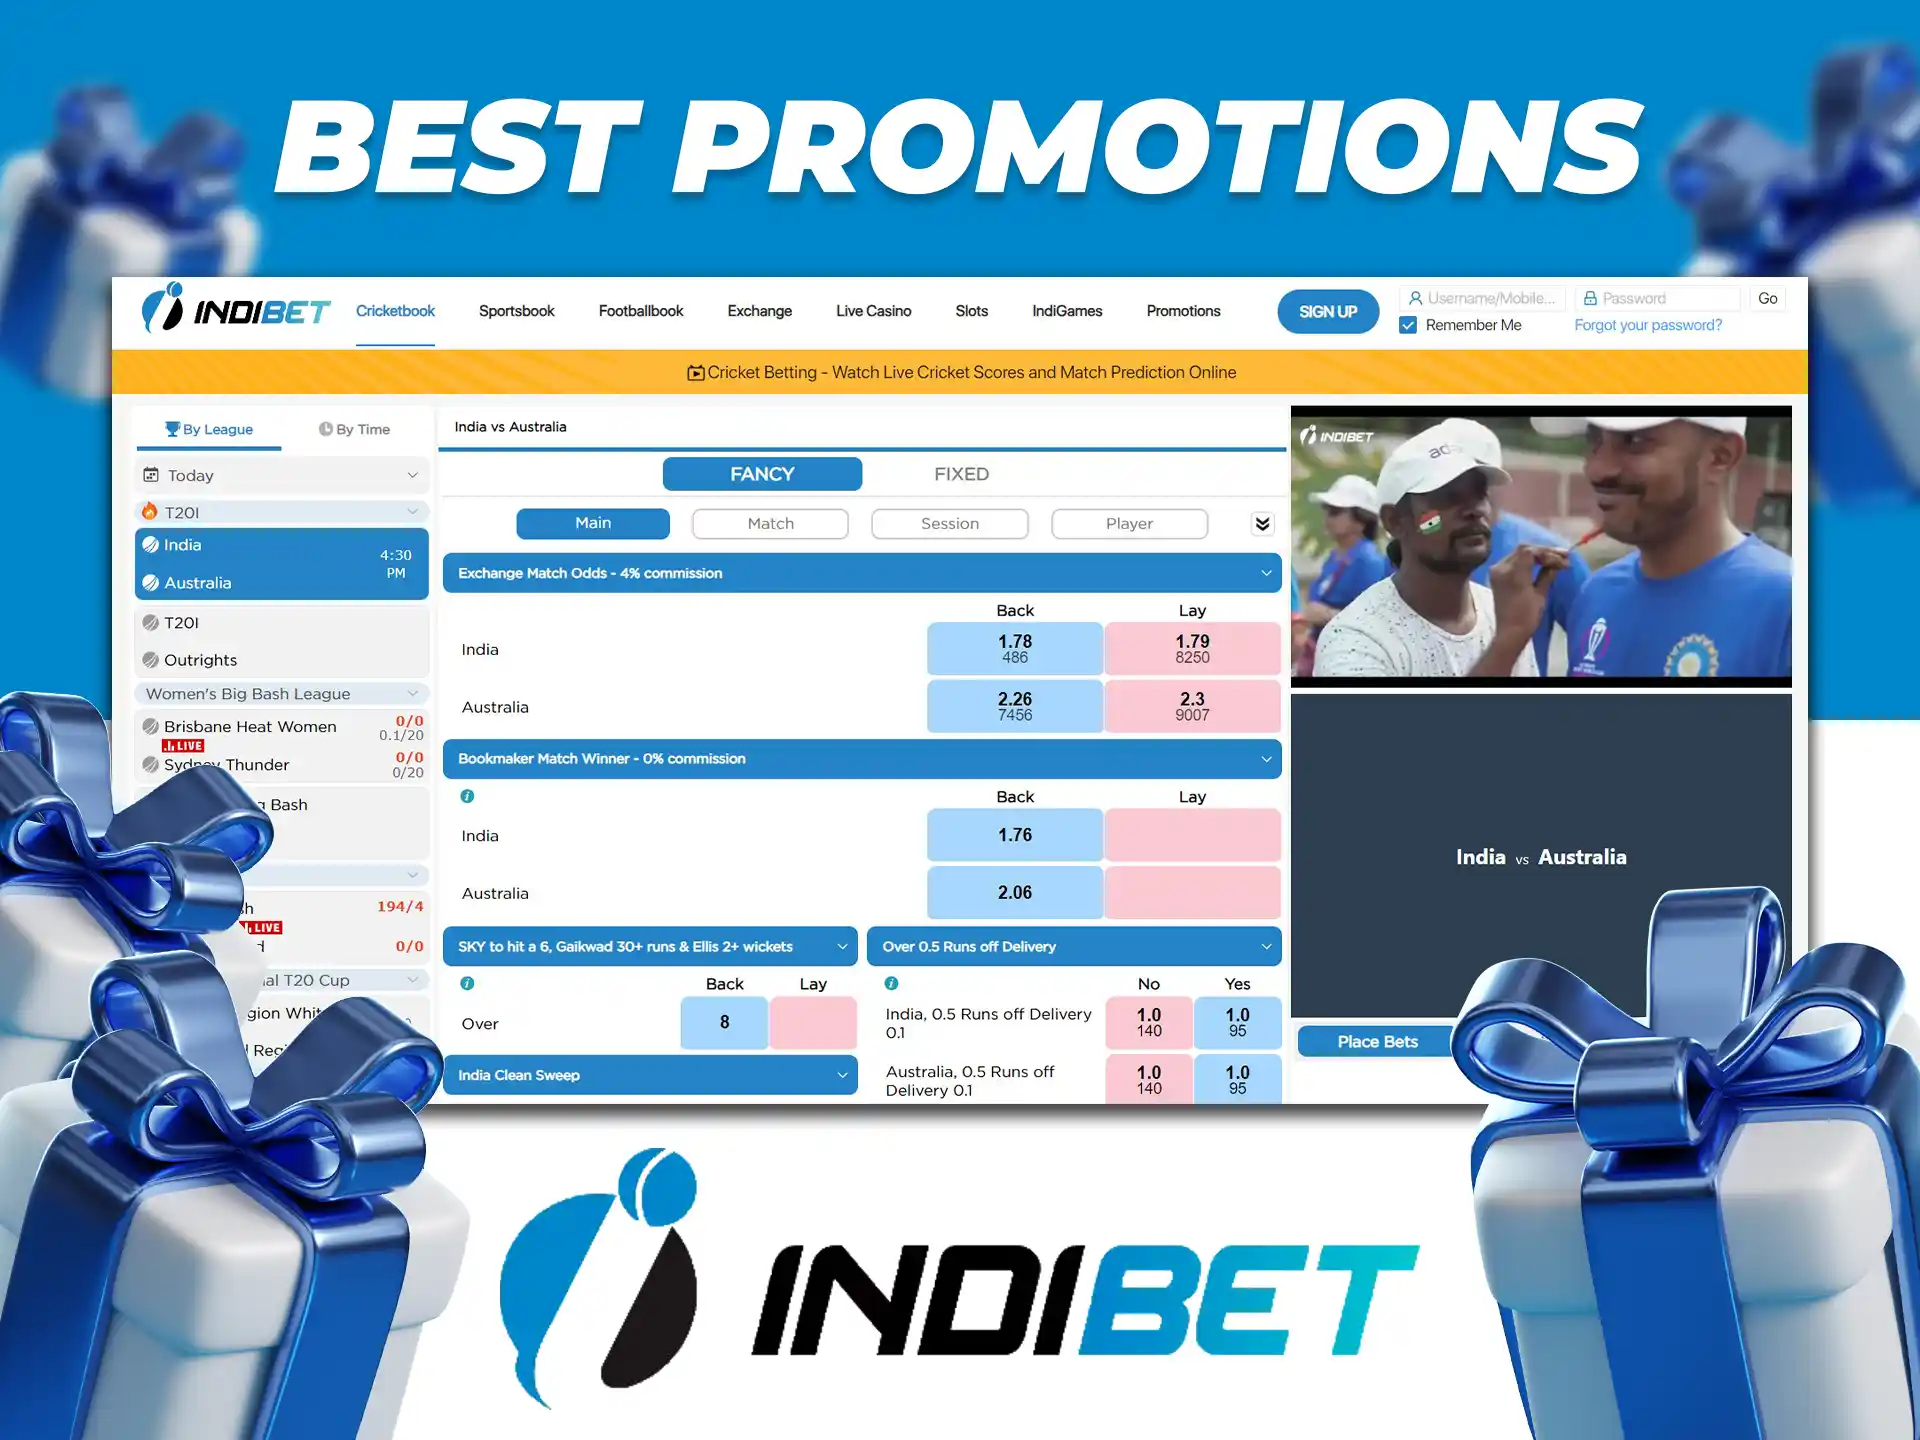 Indibet is a bookmaker with regular promotions and bonuses and a welcome bonus of 100% up to INR 10,000.